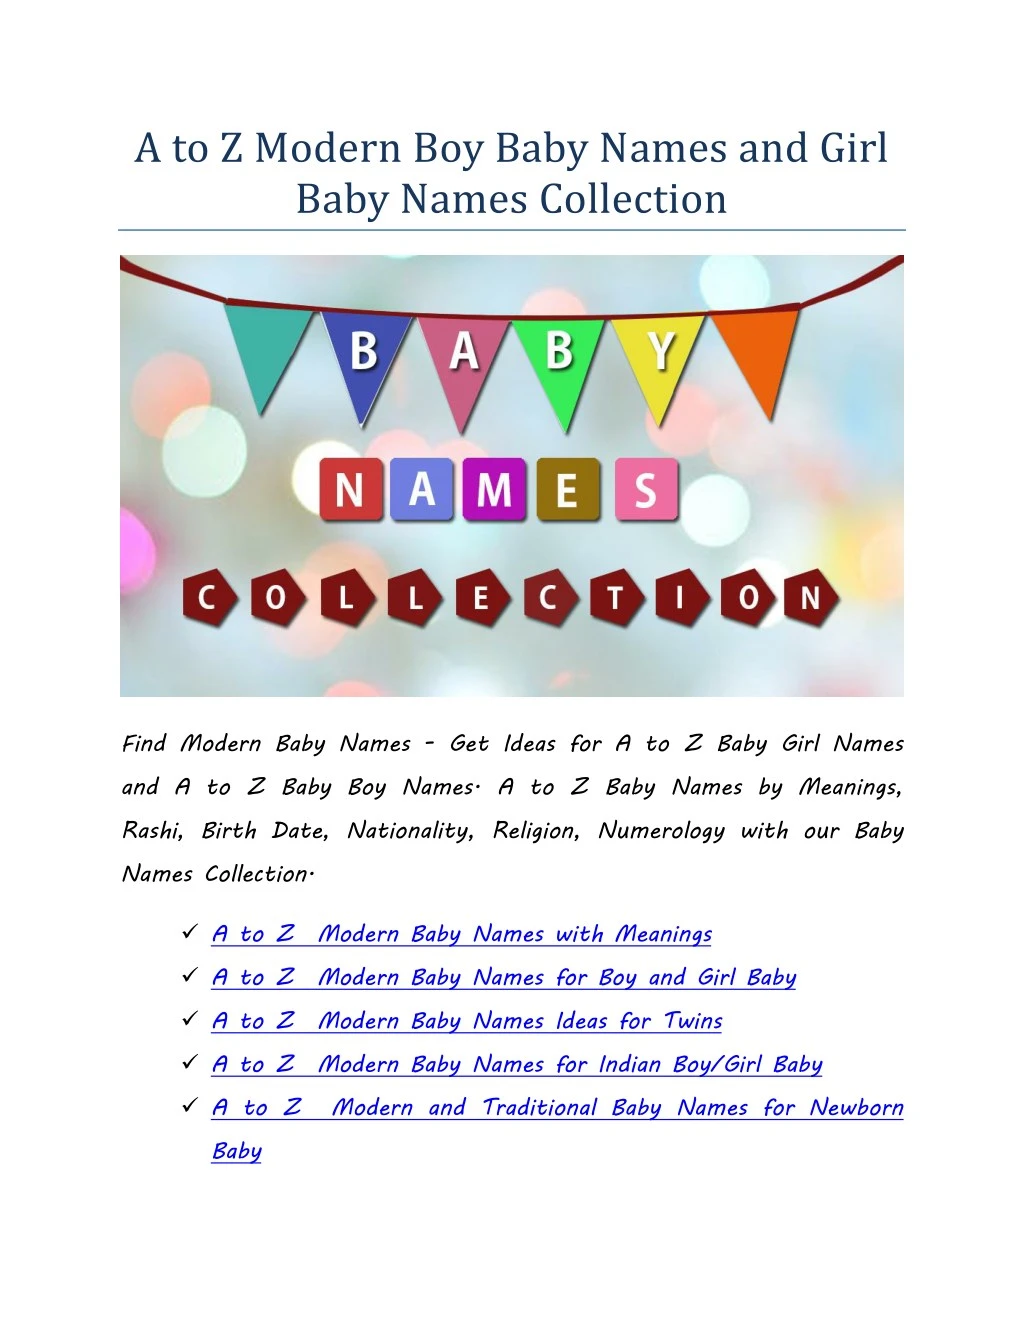 a to z modern boy baby names and girl baby names